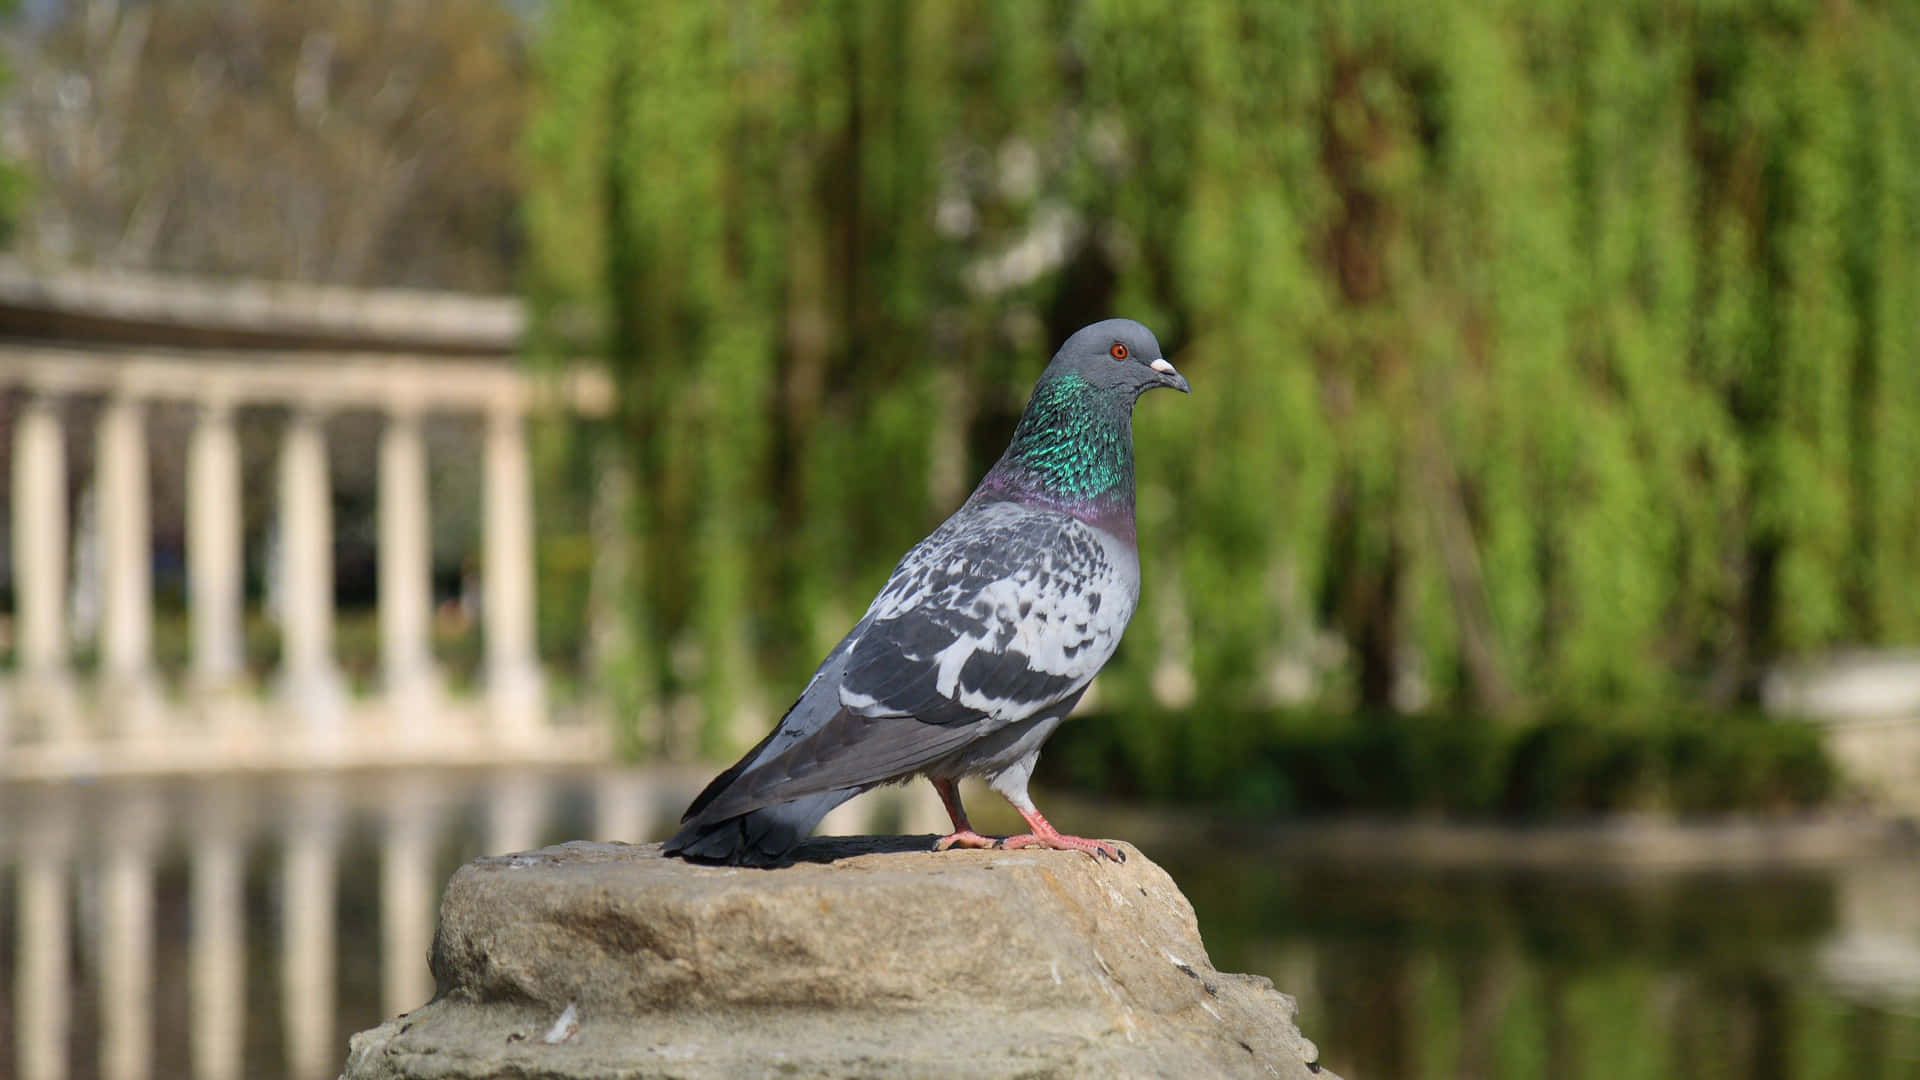 A Pigeon Perched on a Steel-Railed Bridge